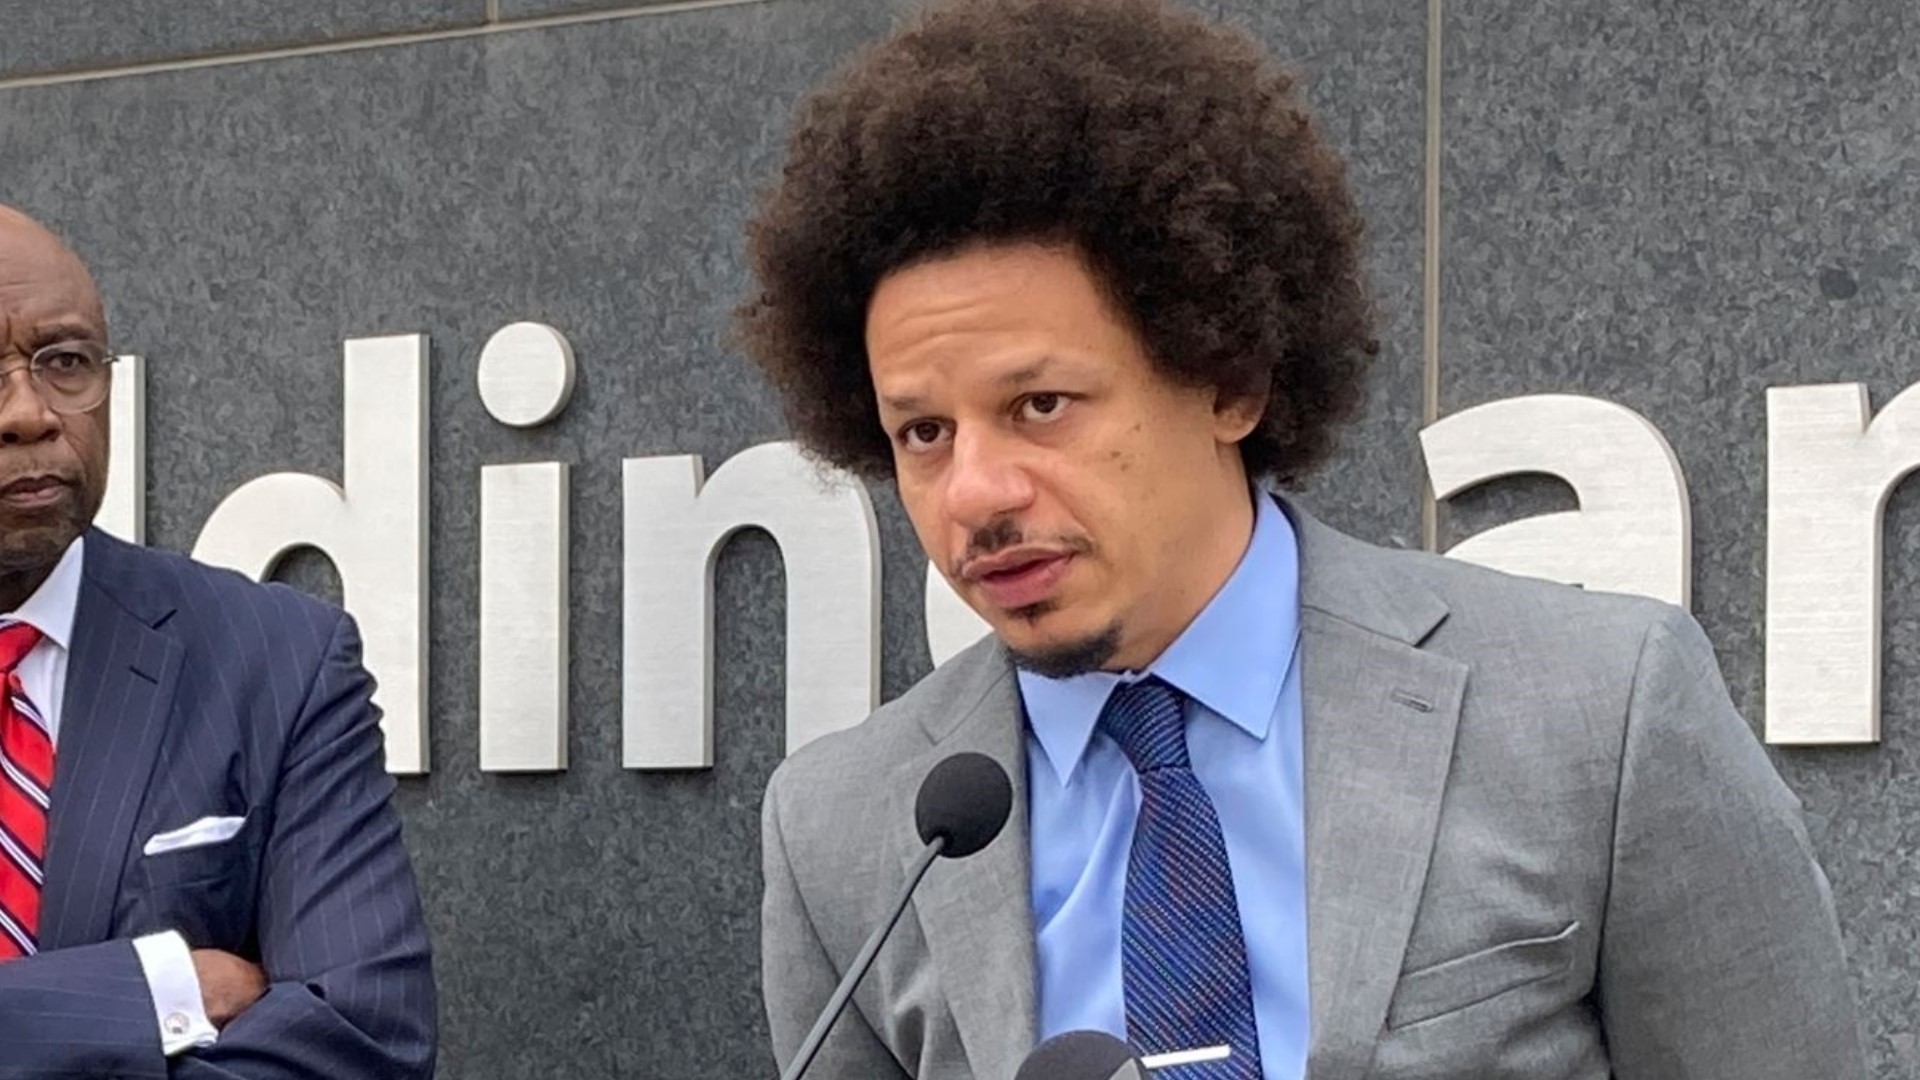 Eric André said last year he felt he had been racially profiled in a search at Atlanta's airport.